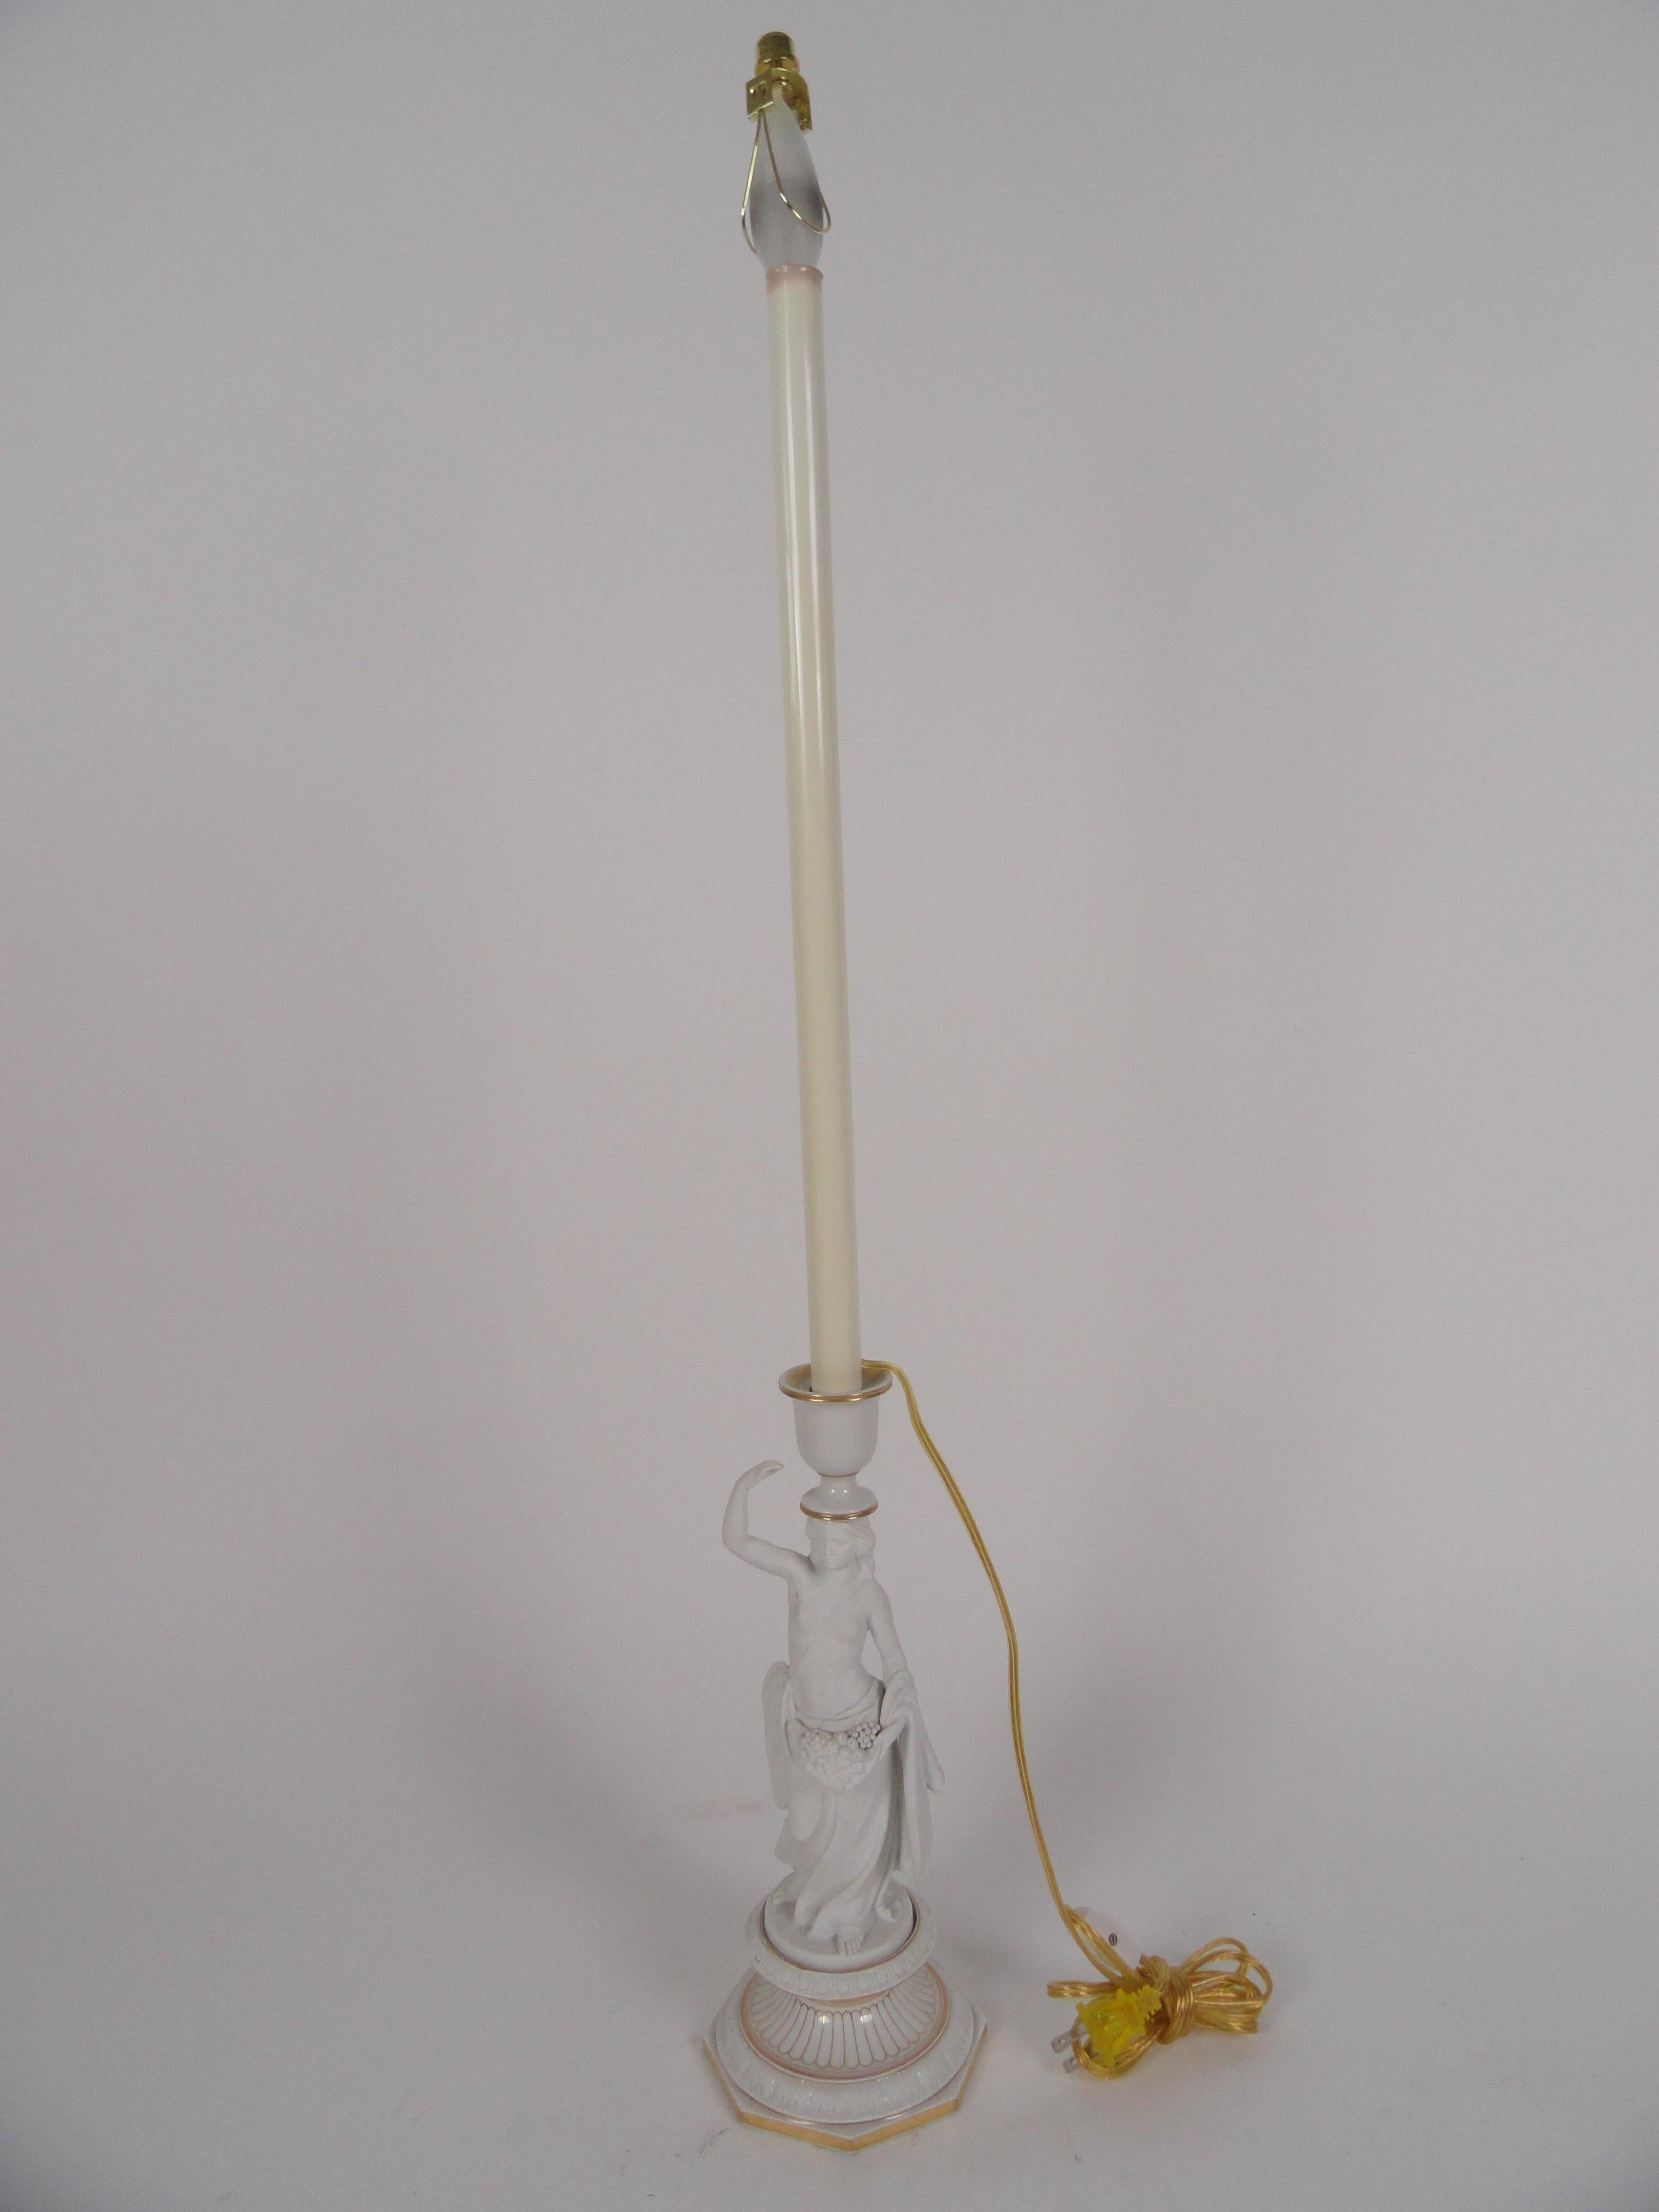 White bisque female figure lamp. Gold leaf detail. Markings on bottom. Newly wired with inline switch.
Measures: Height is 13